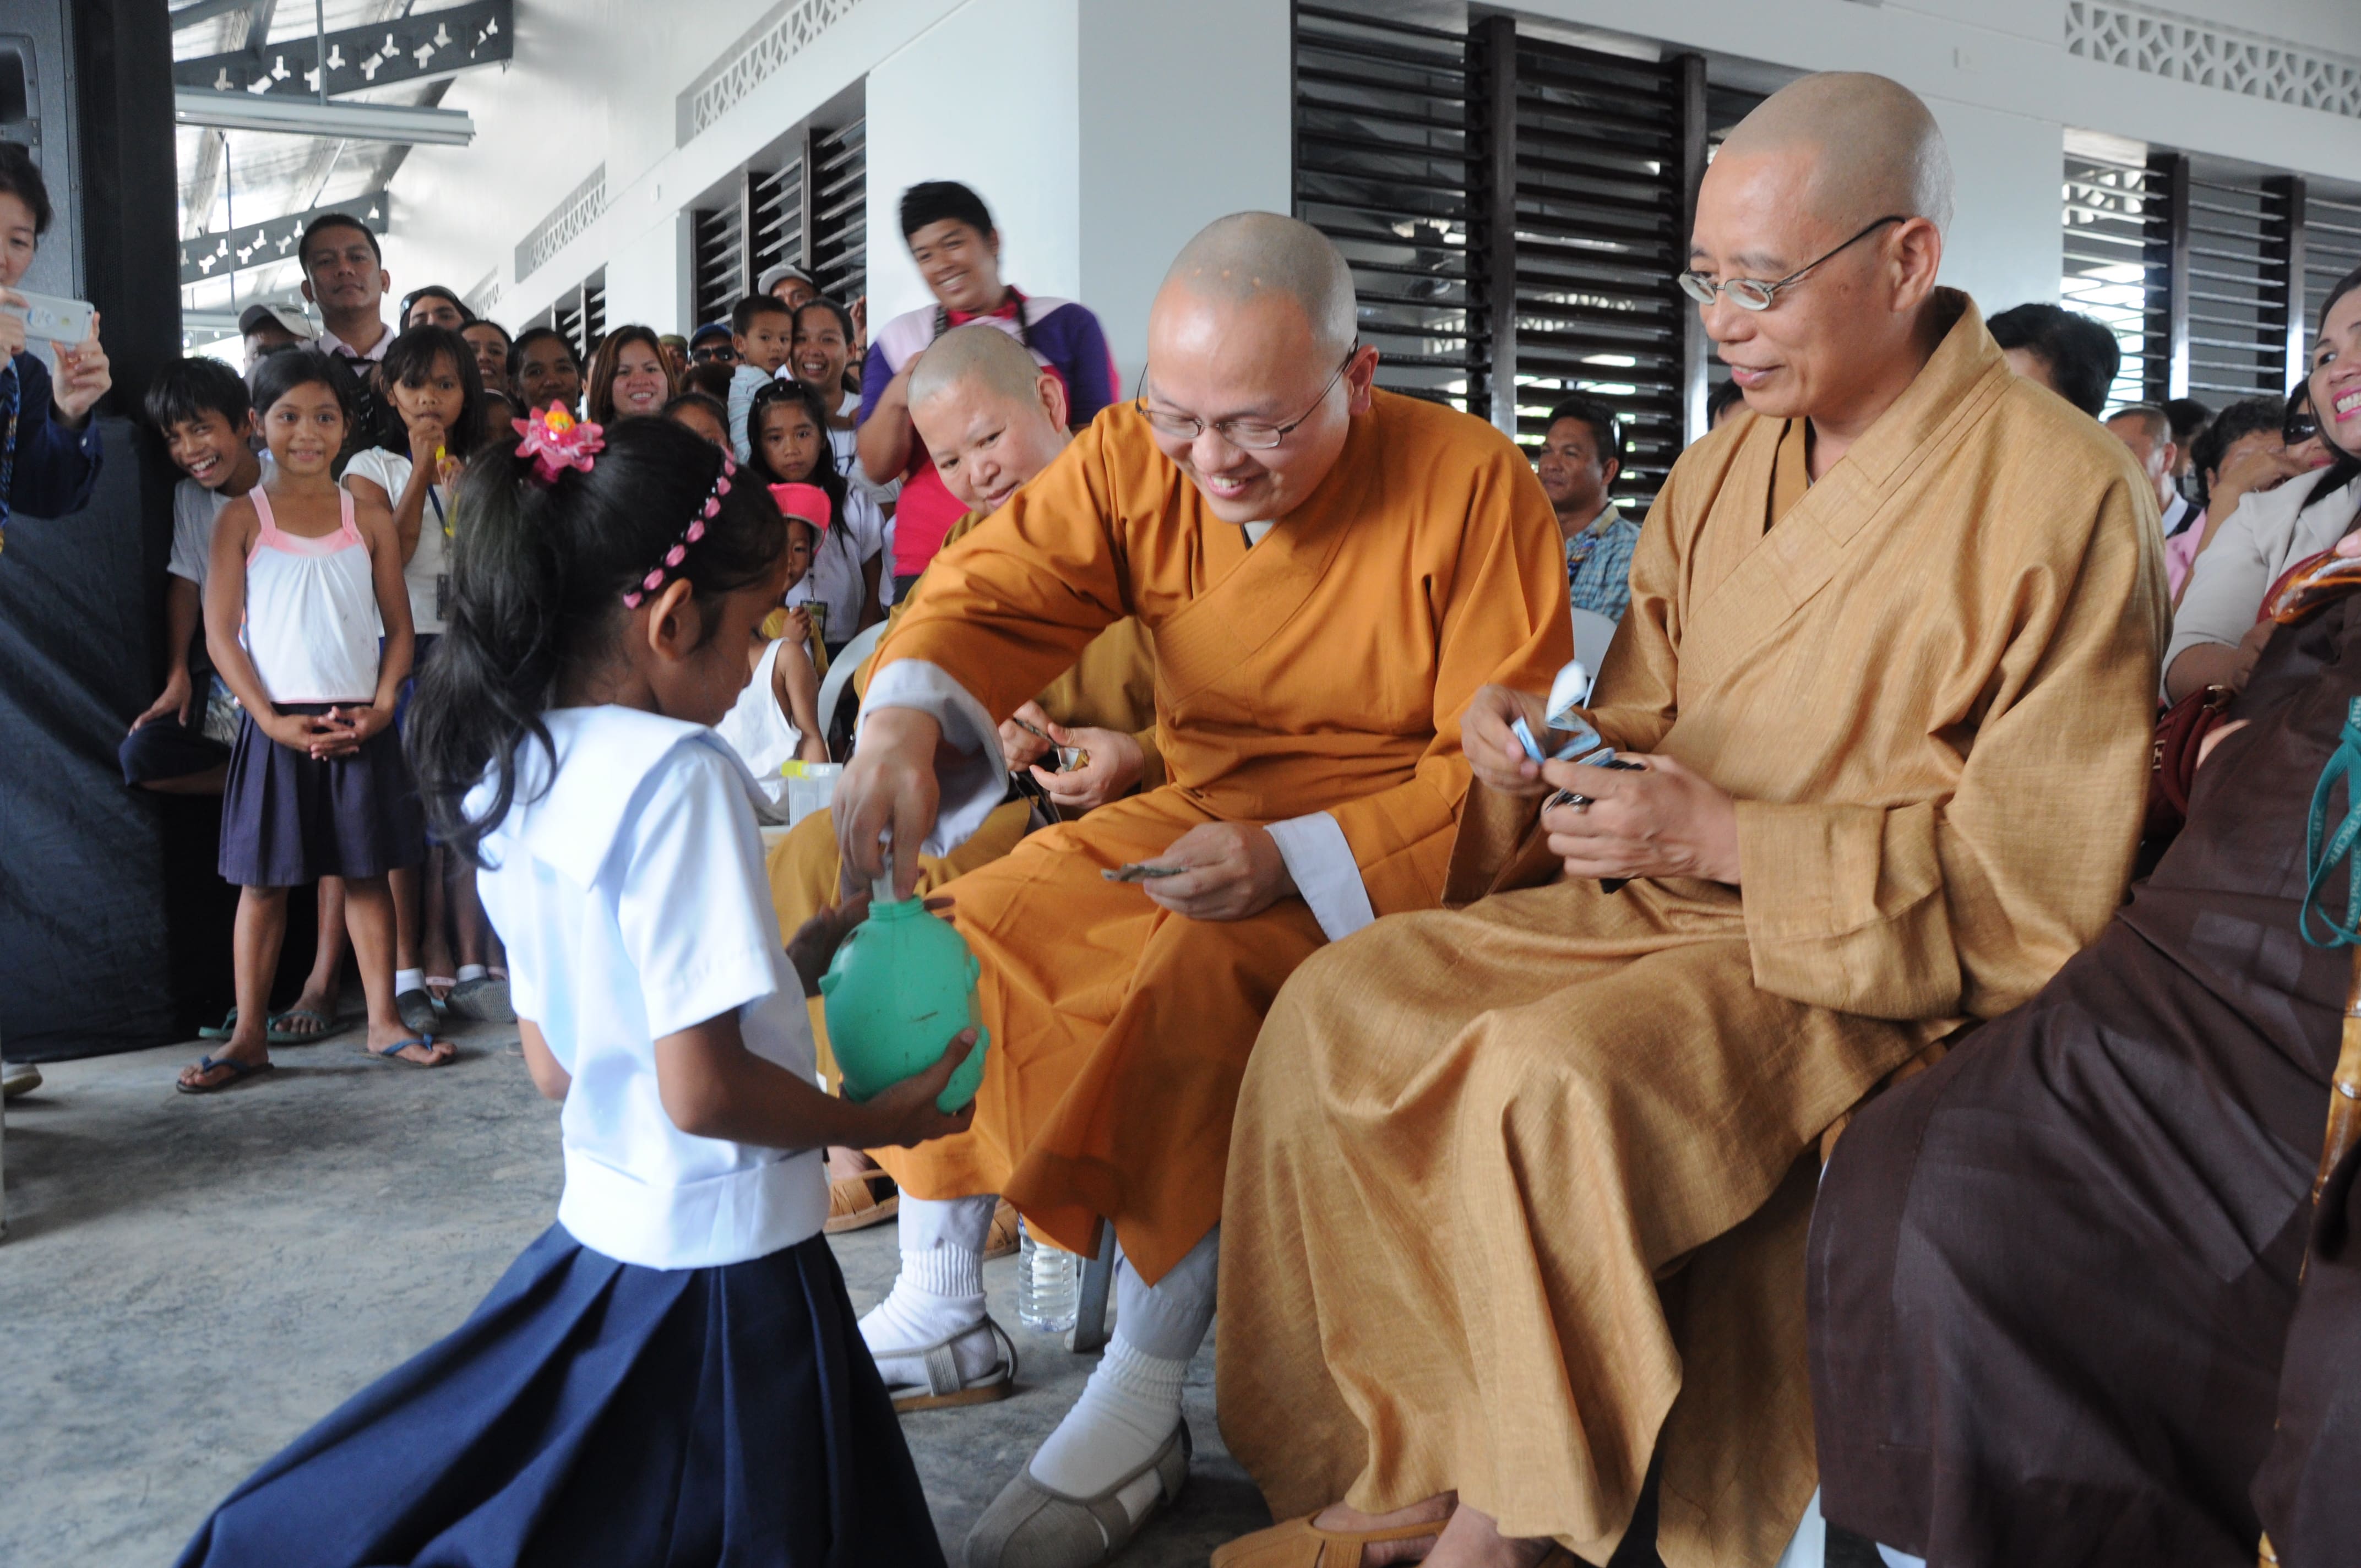 Buddhist monks from Long Hua Temple in Davao City donate to a child’s piggy bank during the turnover ceremony of Mangayon Elementary School on December 1, 2014.